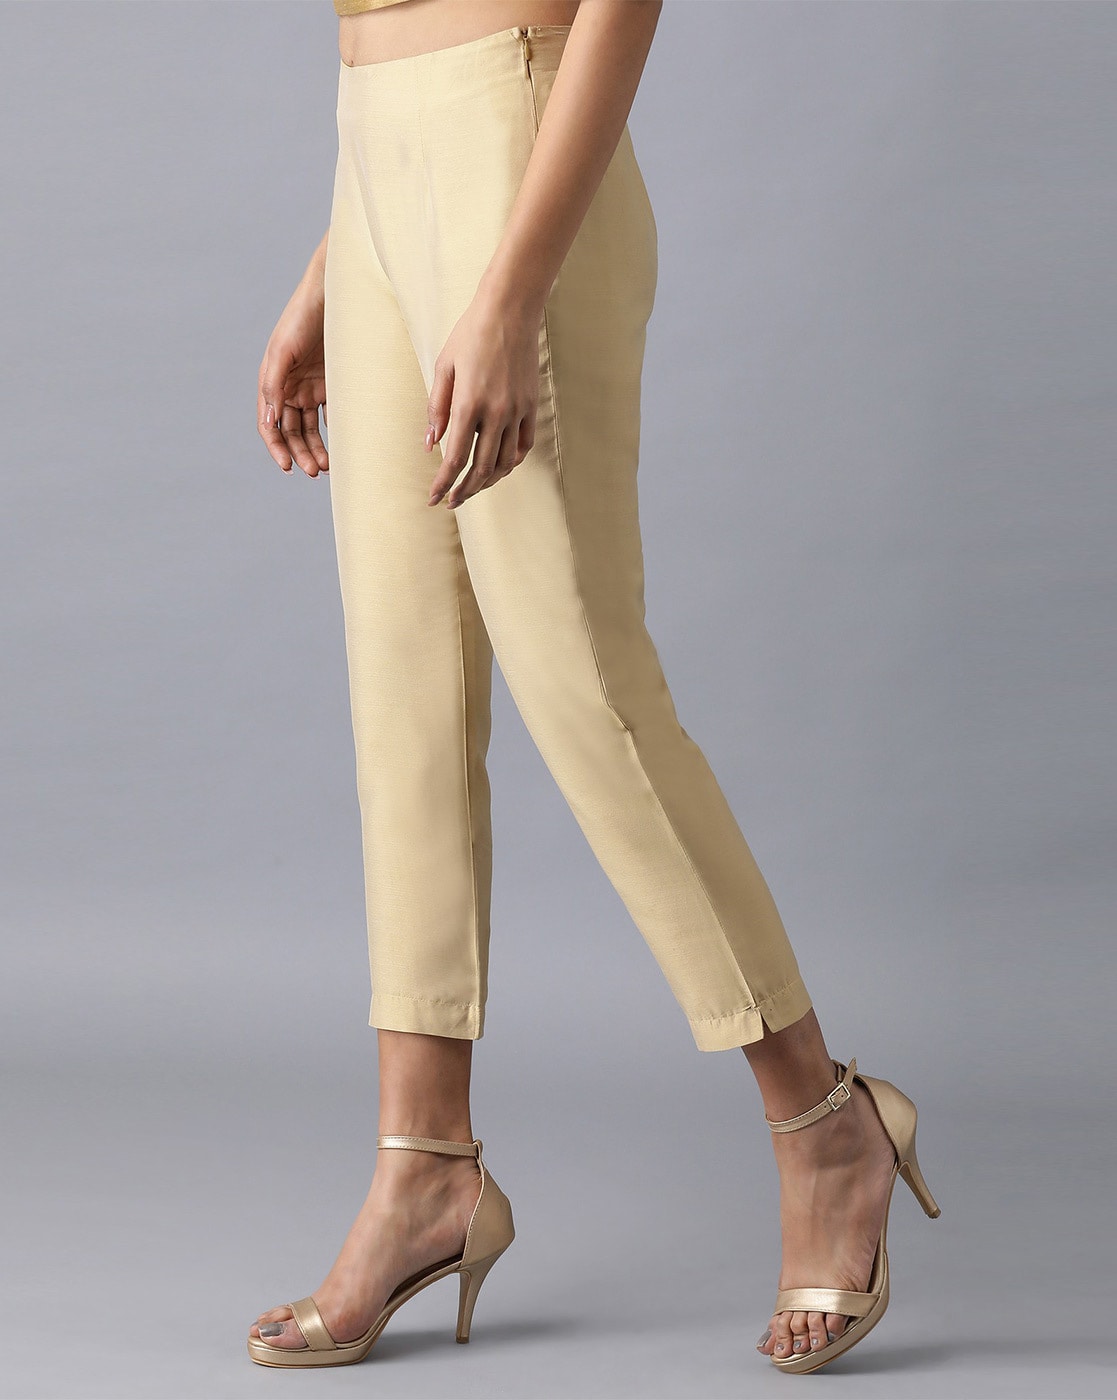 How To Wear Golden Pants | Look Book for Gold Metallic Palazzo